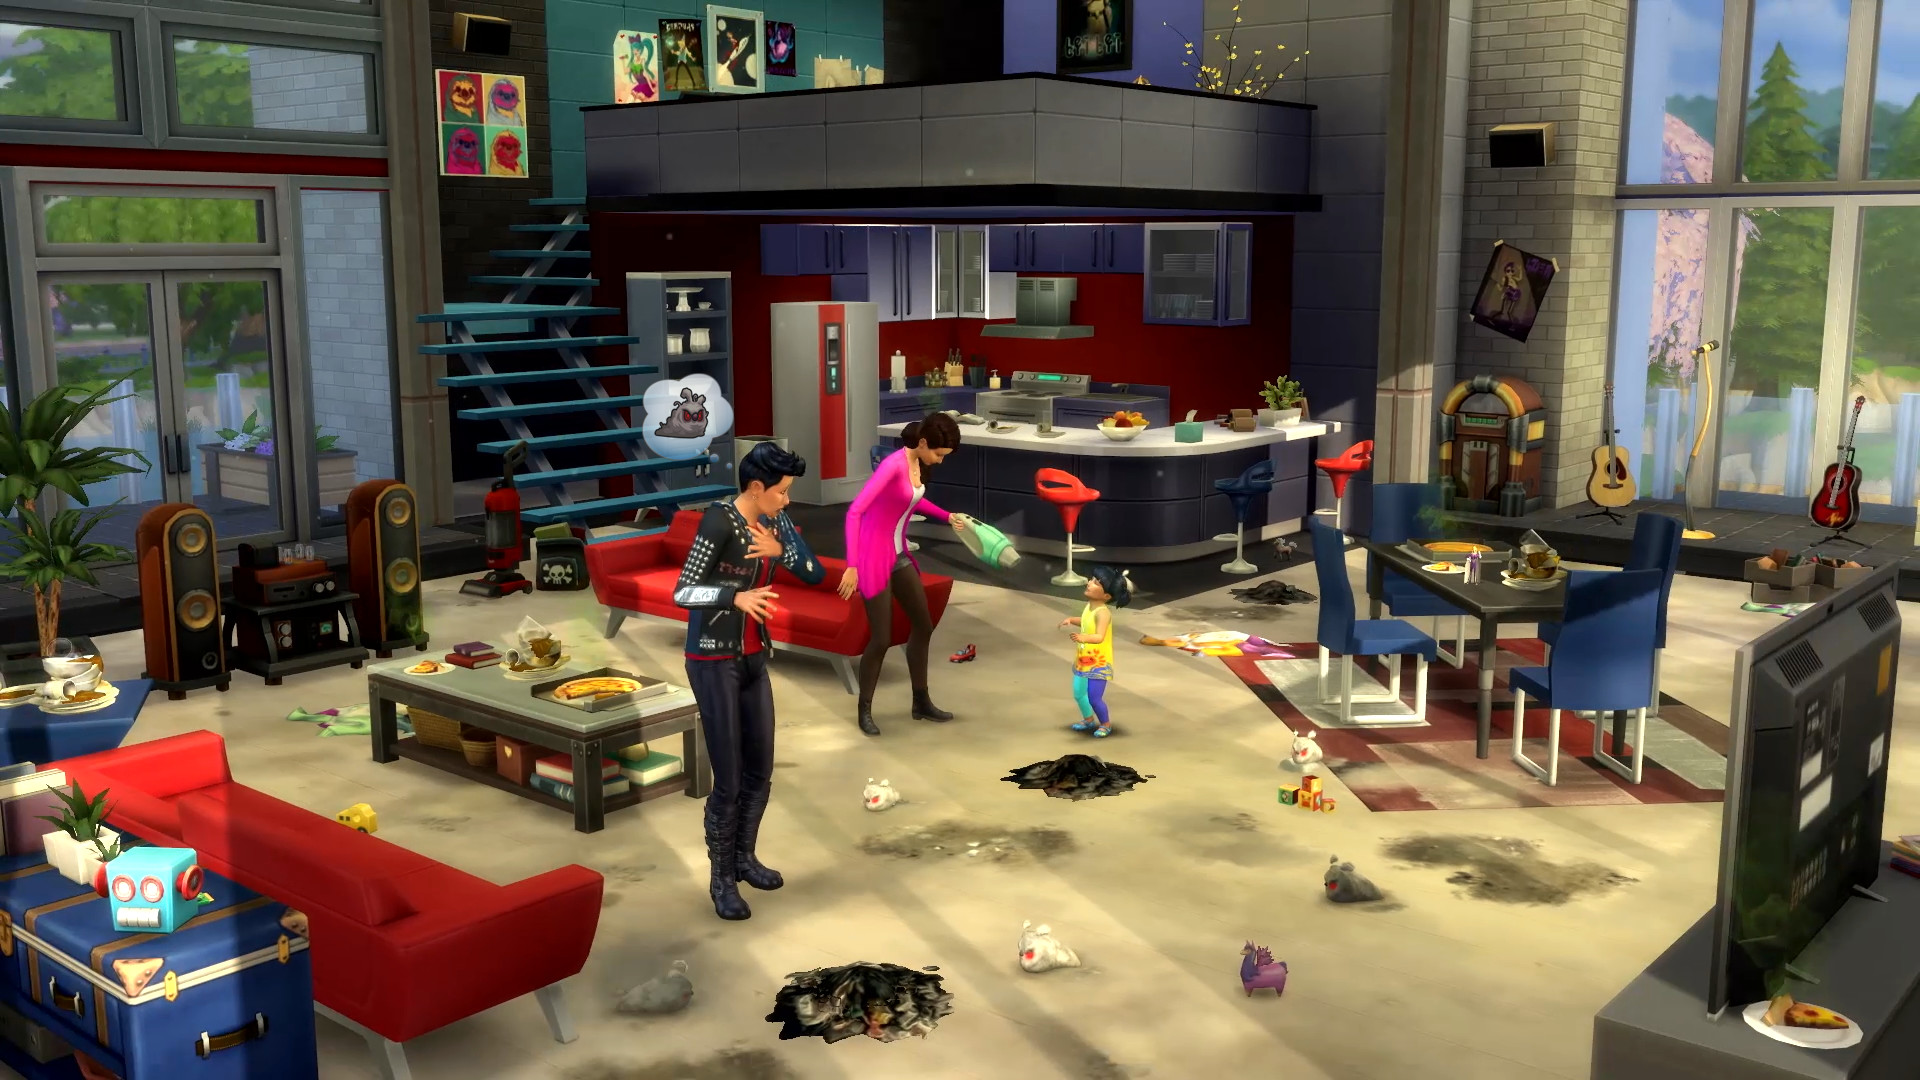 Skidrow Reloaded The Sims 4 1 72 Download The Sims 4 With Dlc Skidrow Reloaded Games Torrents Lela Threads